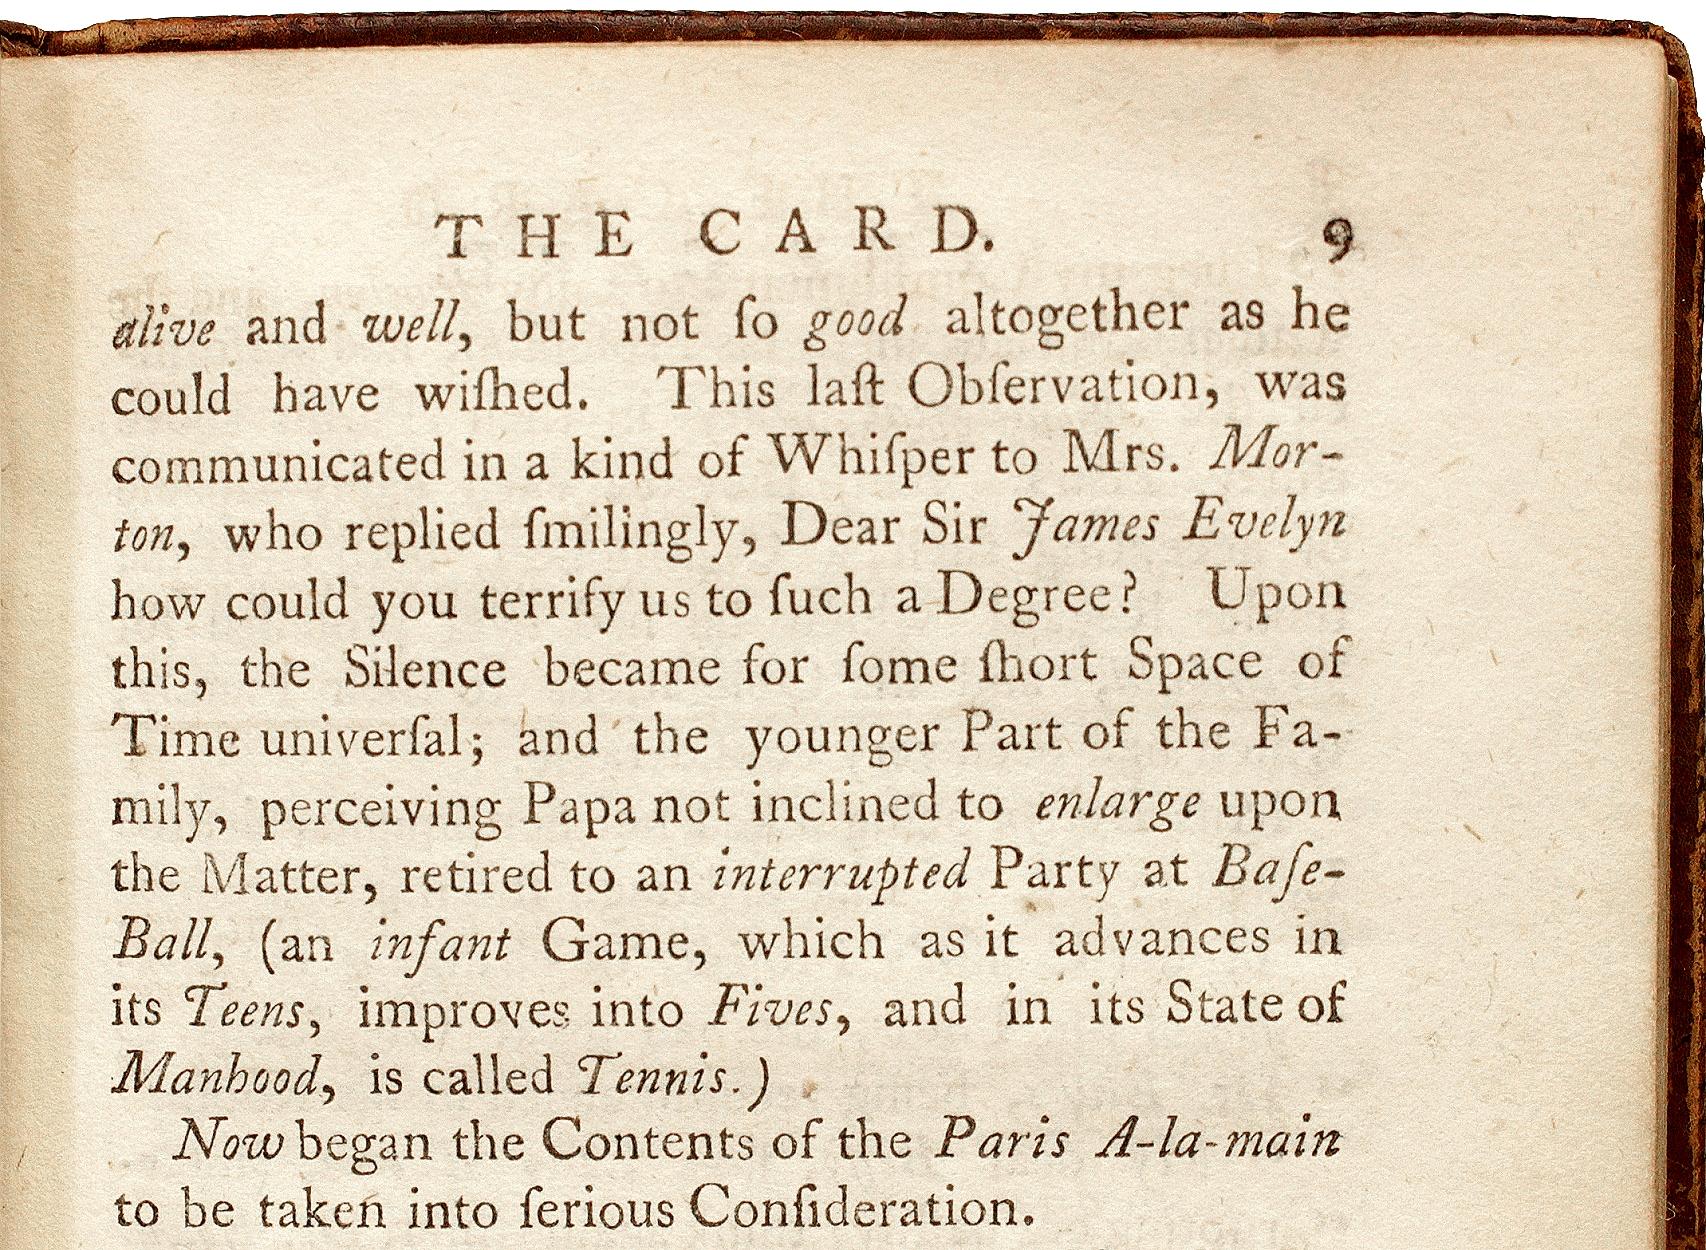 AUTHOR: KIDGELL (John)

TITLE: The Card.

PUBLISHER: London: for the Maker & sold by J. Newberry, 1755.

DESCRIPTION: FIRST AND ONLY EDITION. 2 vols., 6-5/8